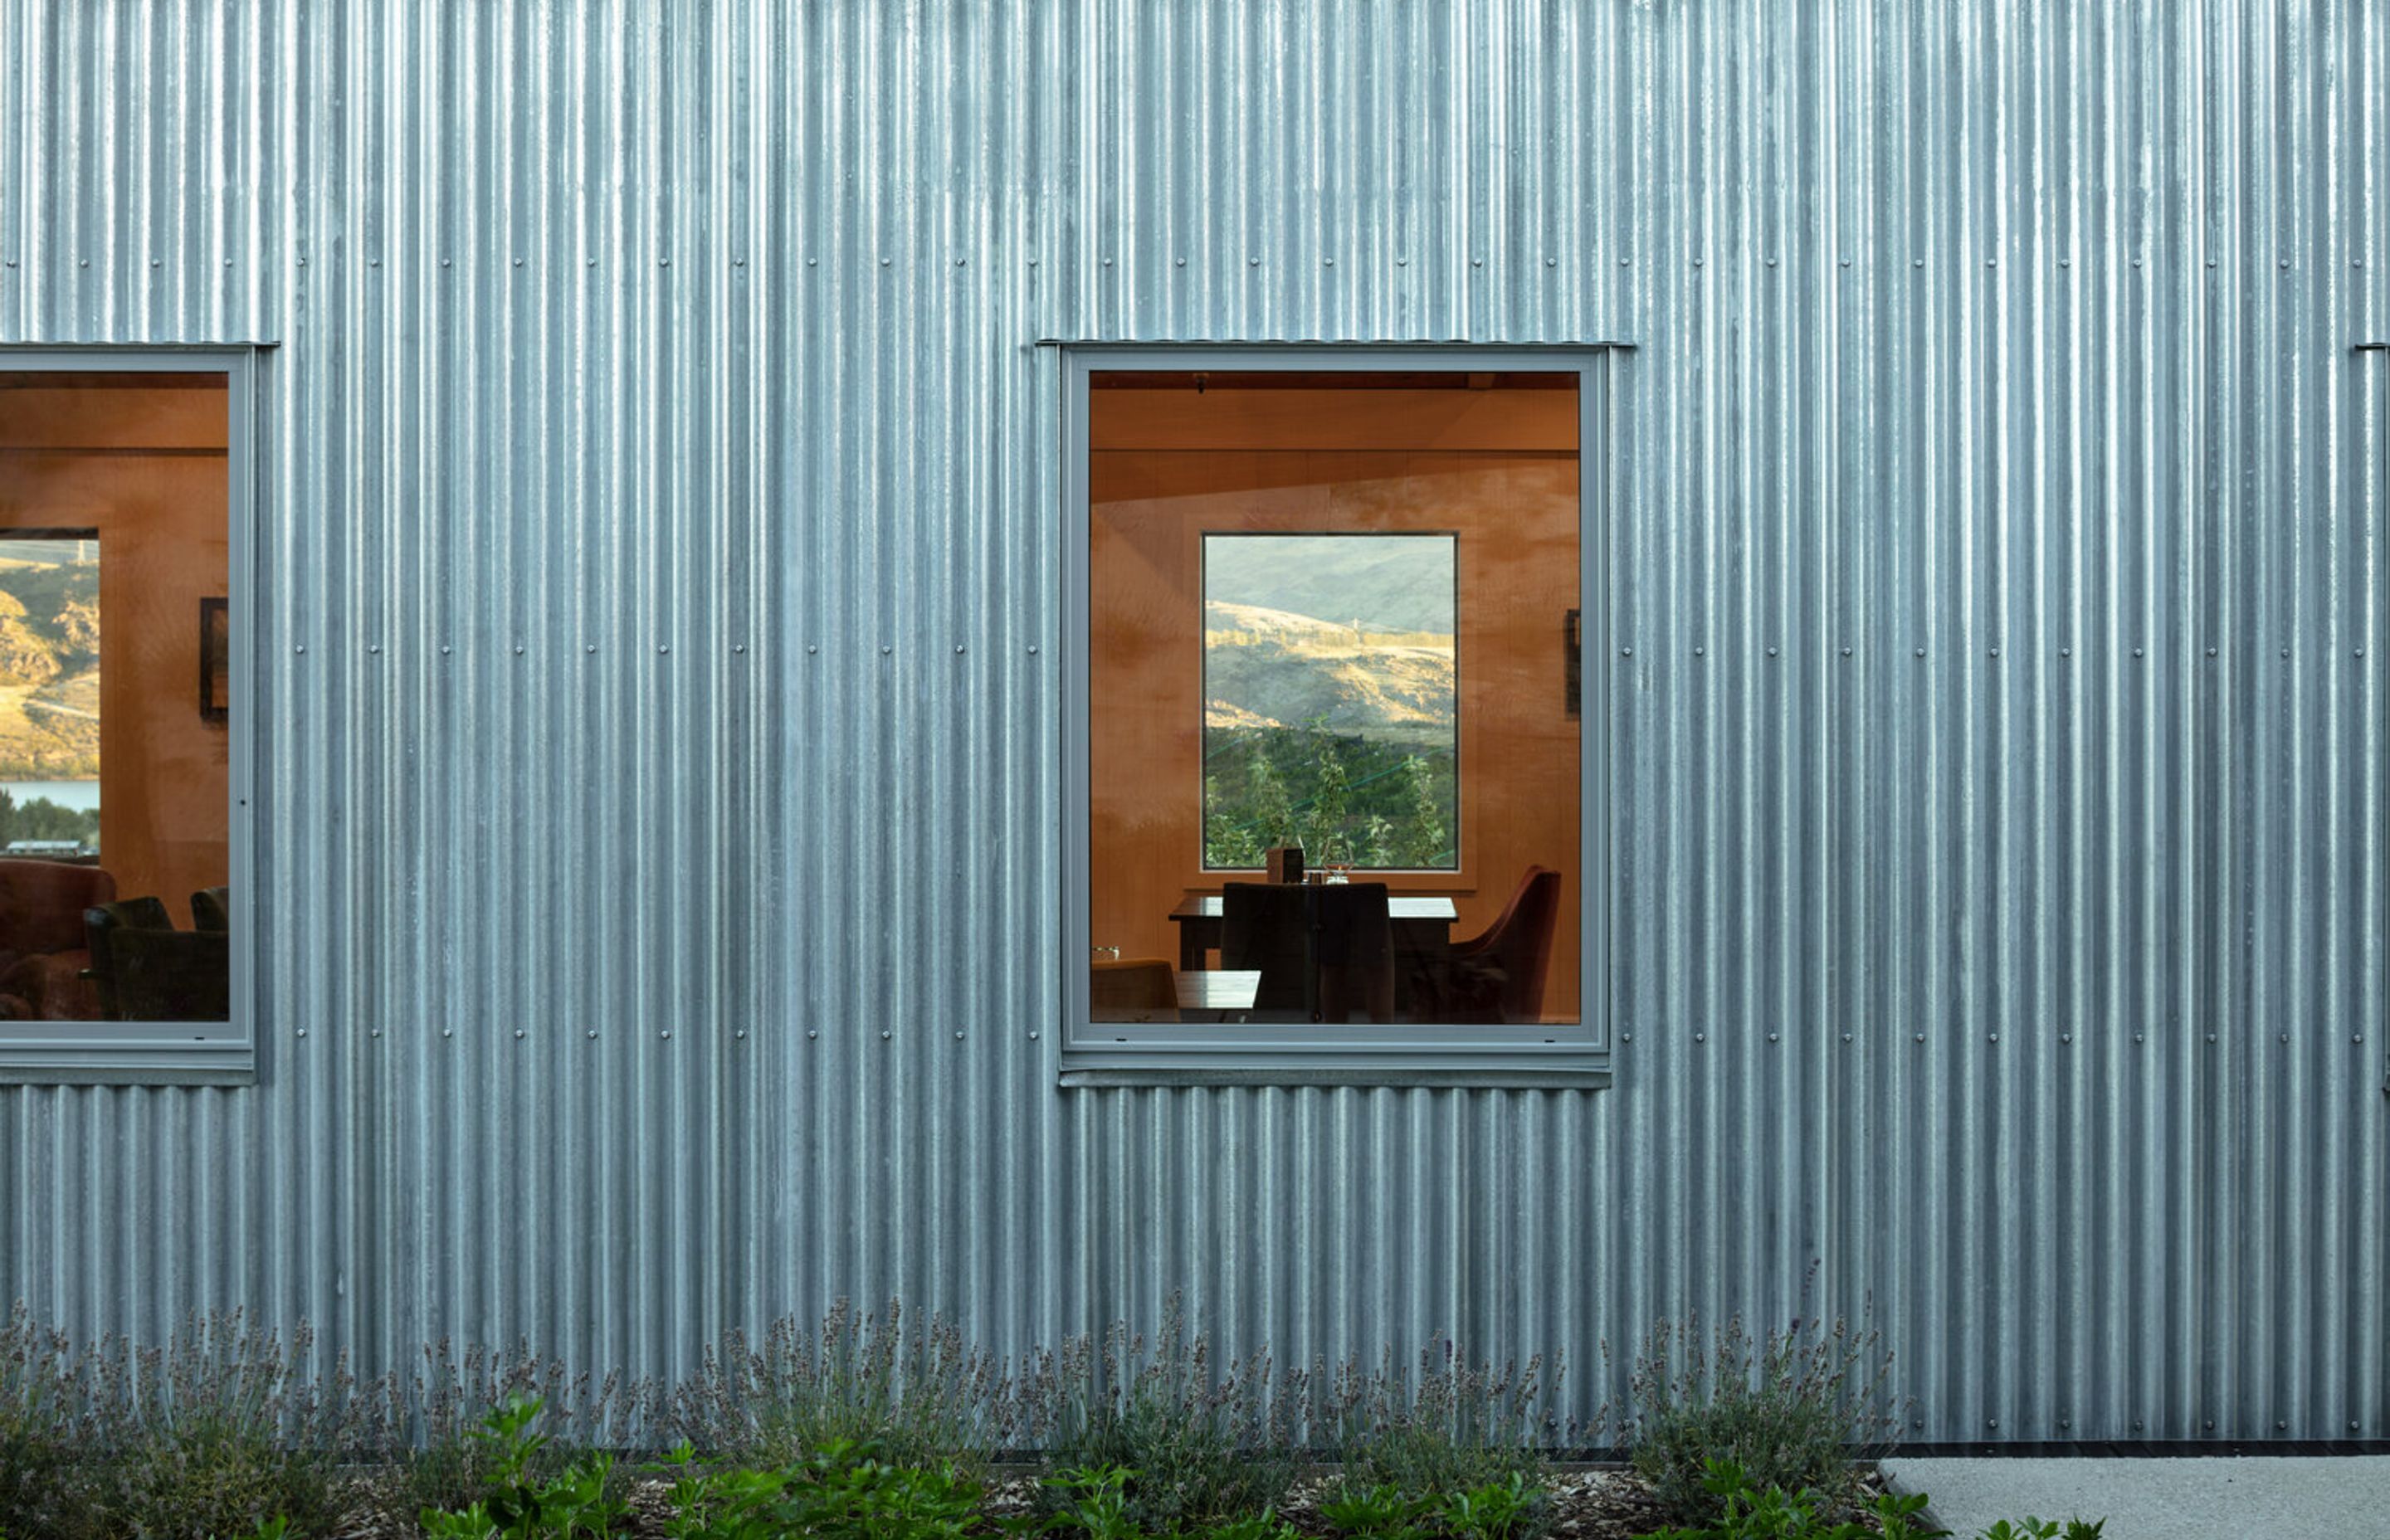 The simple geometry of picture windows allows glimpses right through the wine-tasting room to the view of the Clutha River and hills beyond.